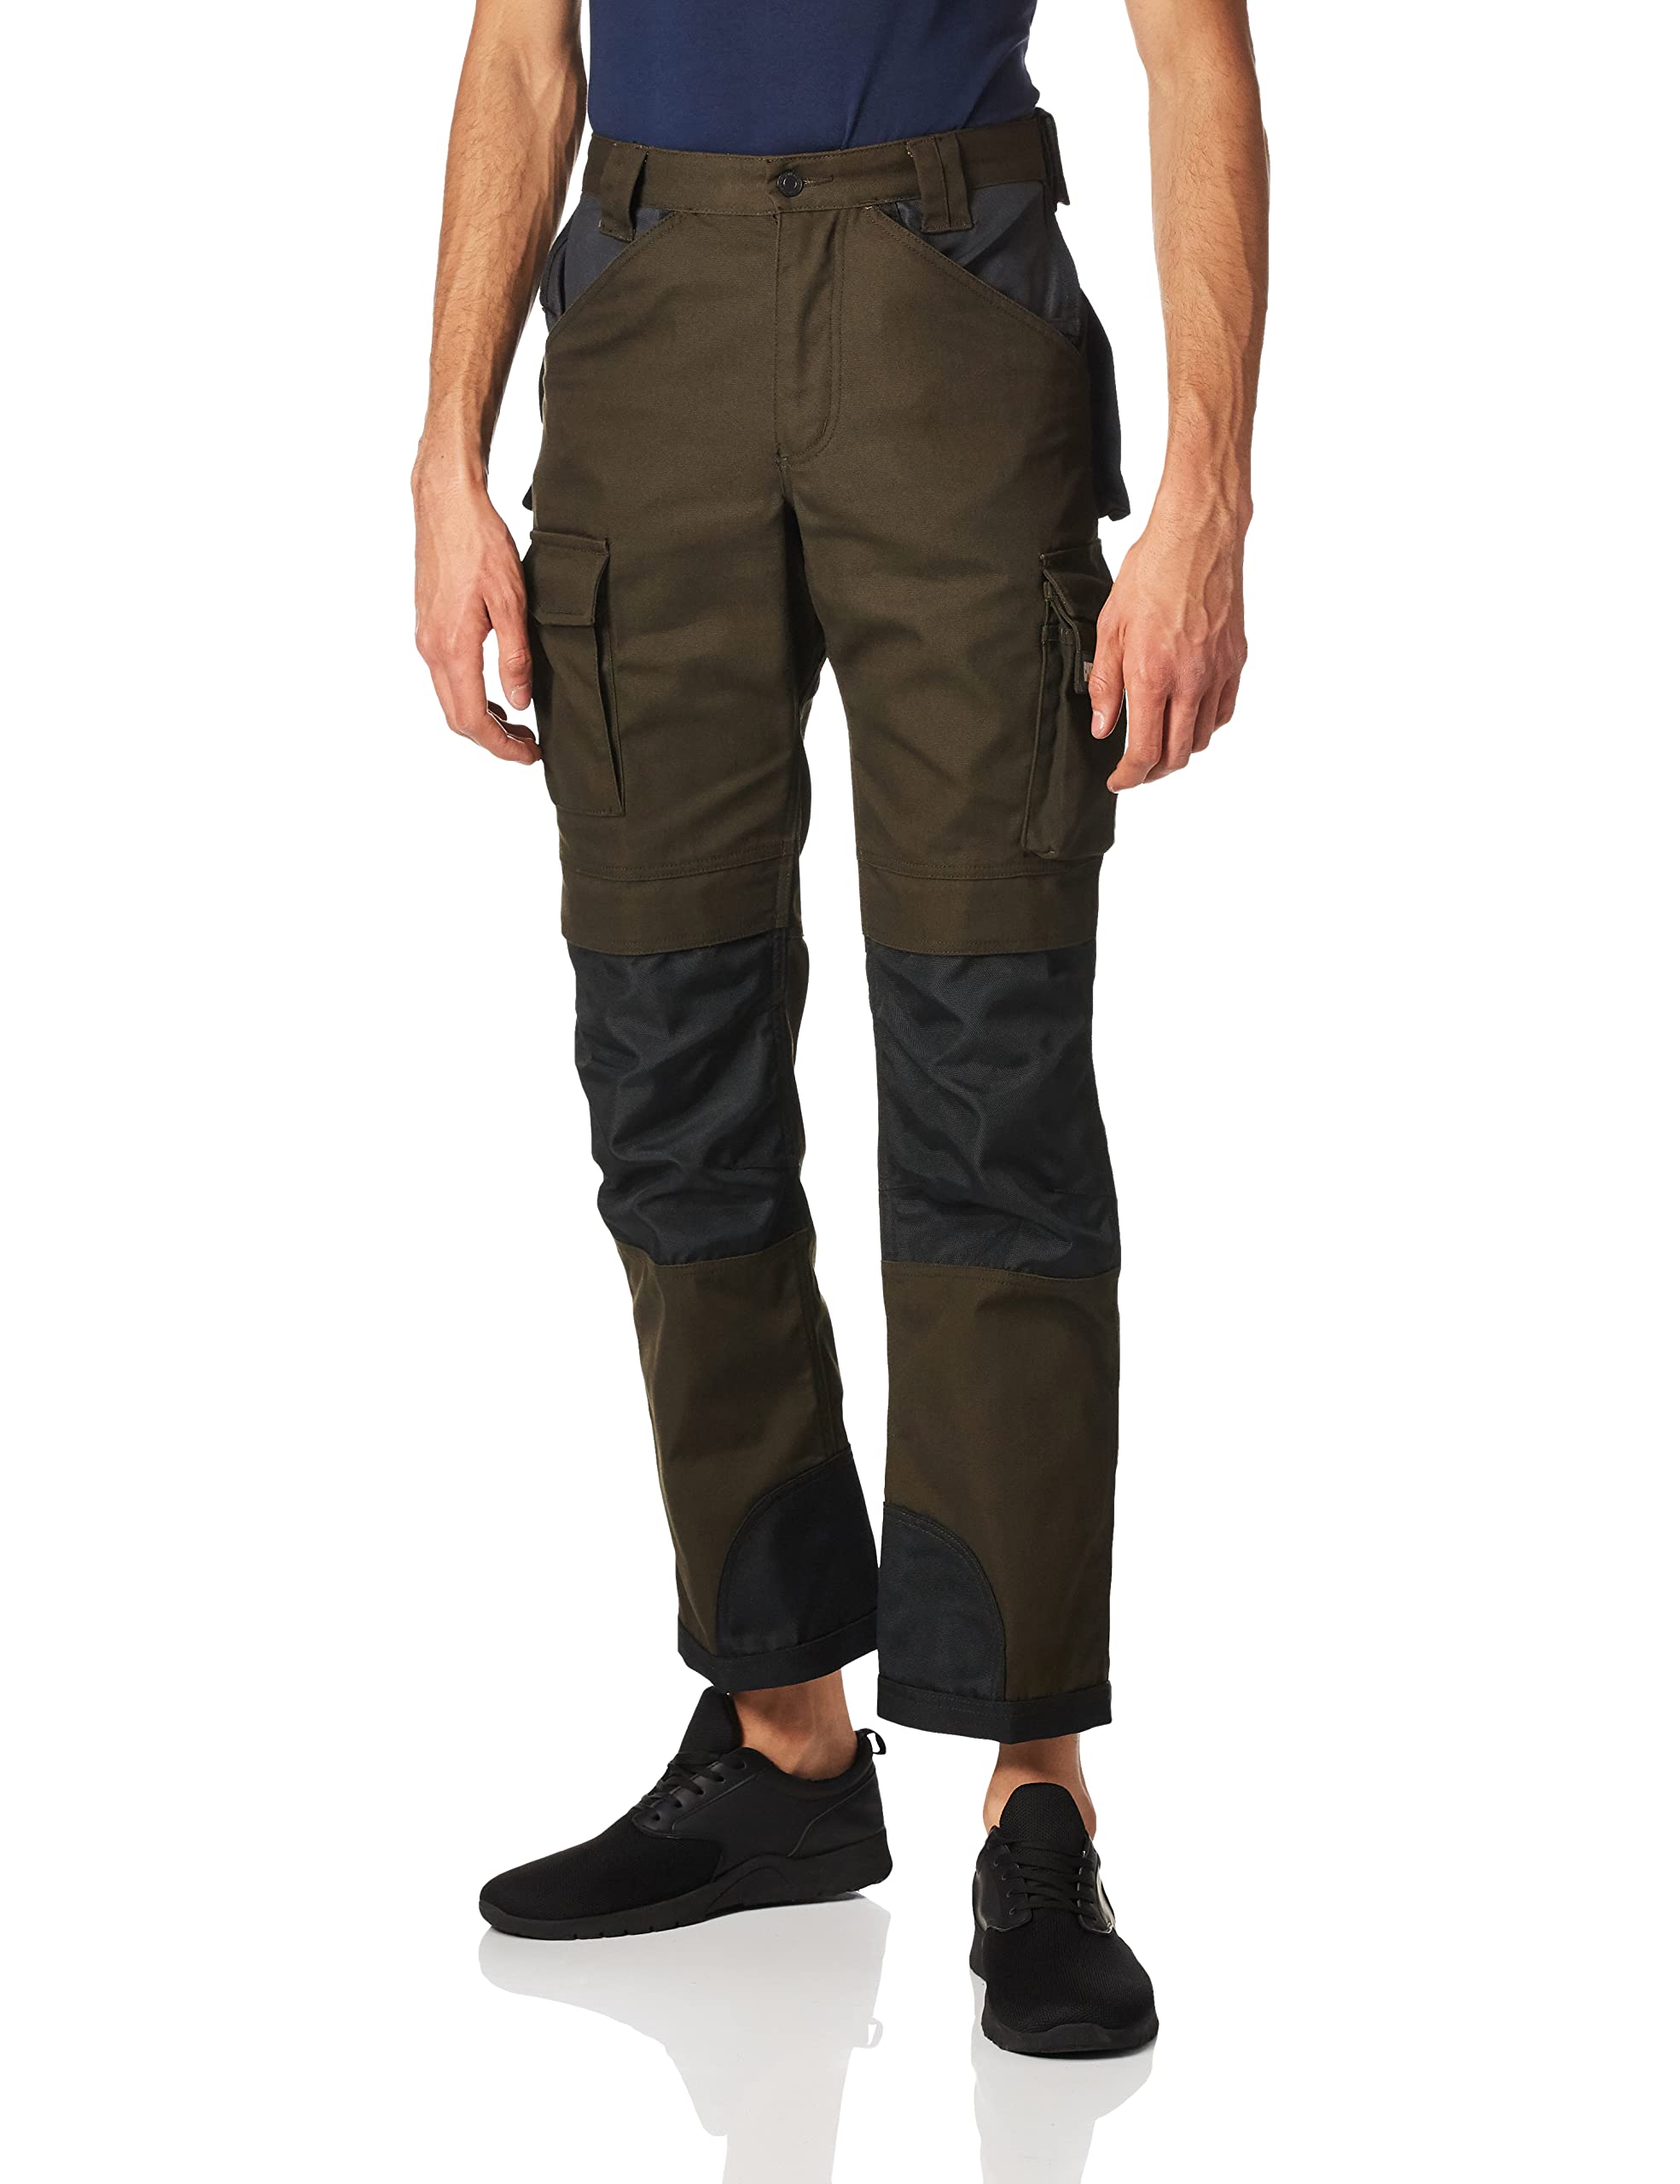 Caterpillar Trademark Work Pants for Men Built from Tough Canvas Fabric with Cargo Space and Ease of Movement, Classic Fit